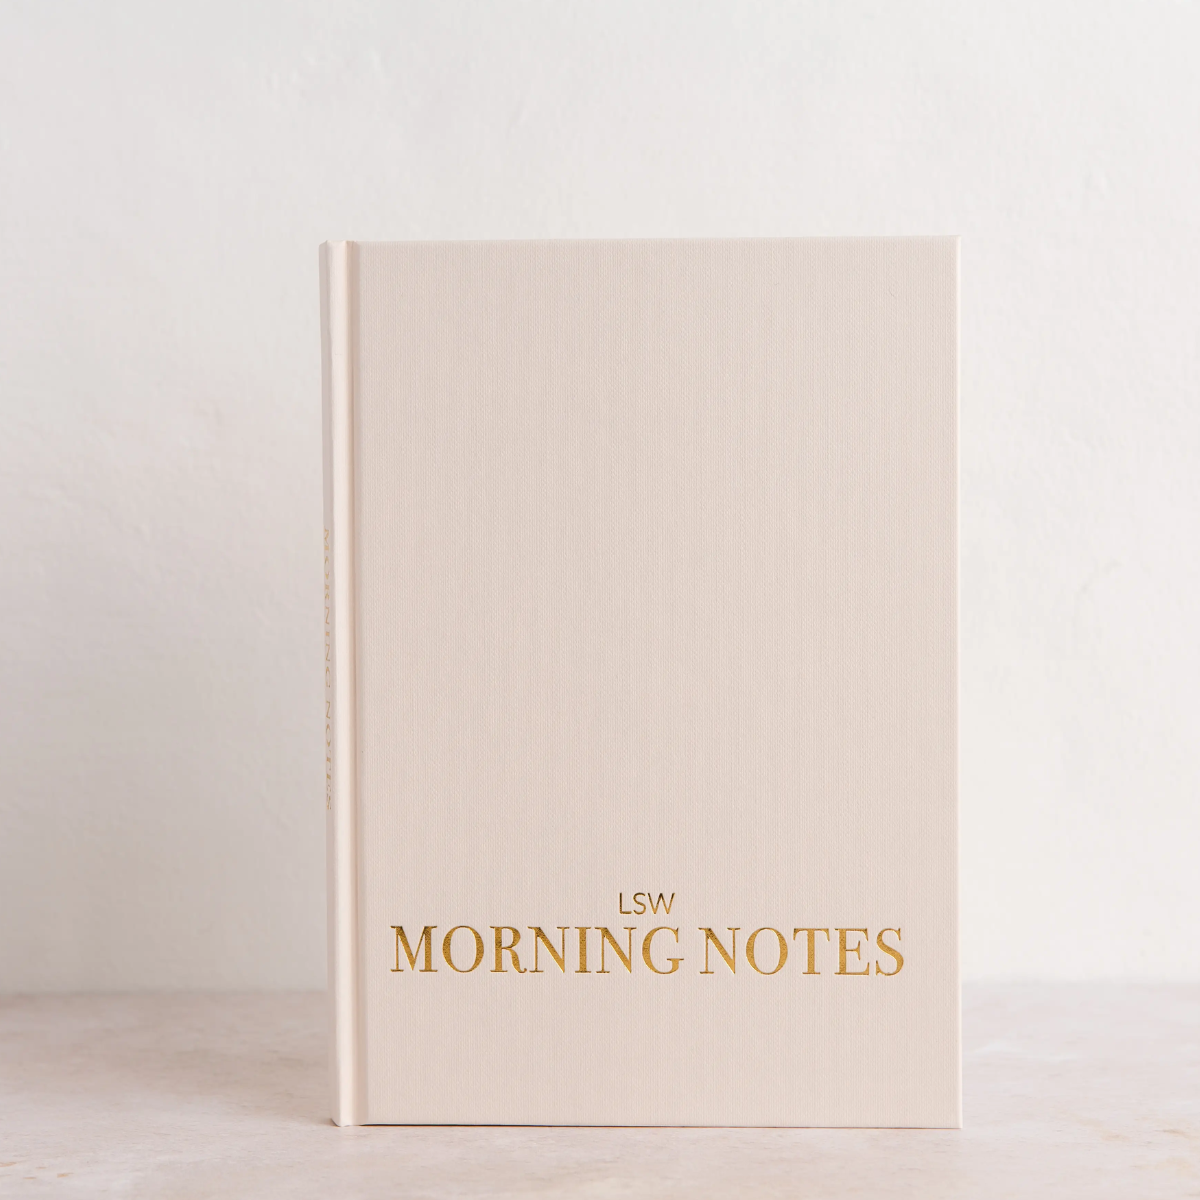 Morning Notes: The Twelve-Week Journal For Everyday Wellbeing